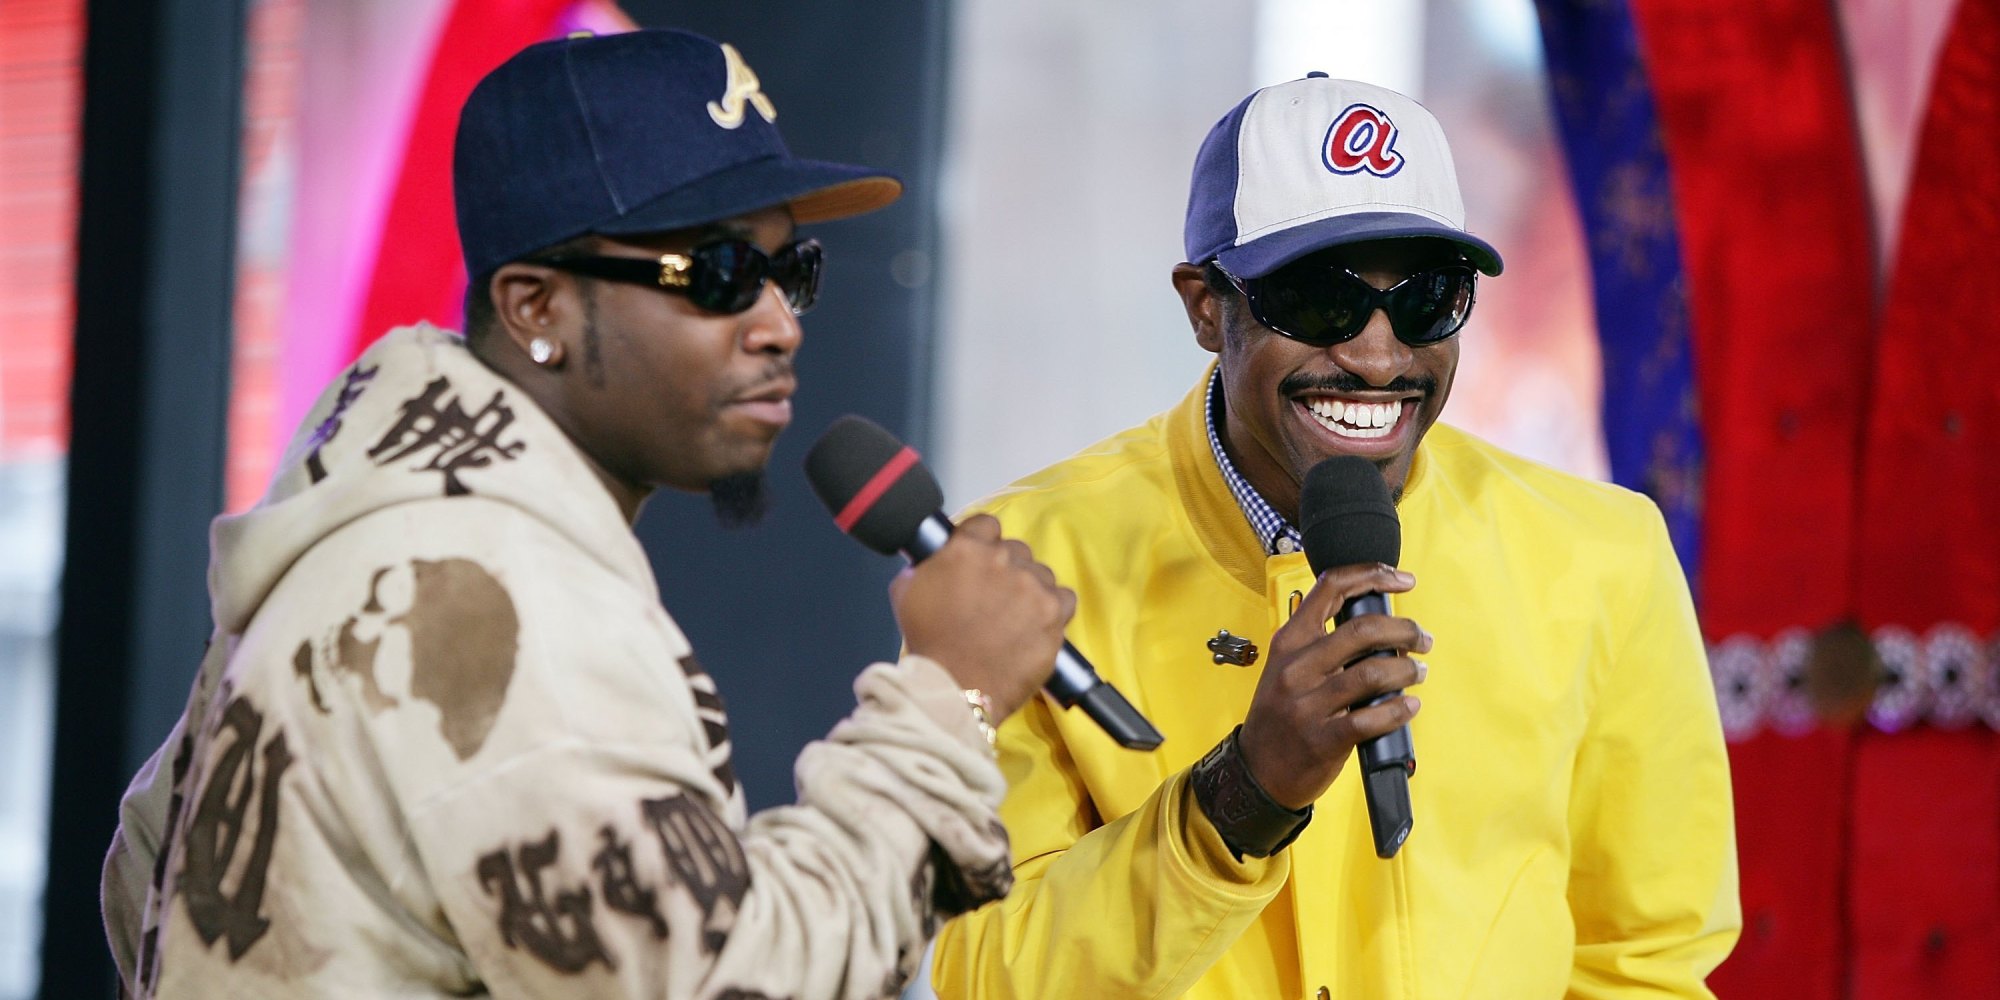 12 Songs Other Than 'Hey Ya!' That Outkast Needs To Perform On Their